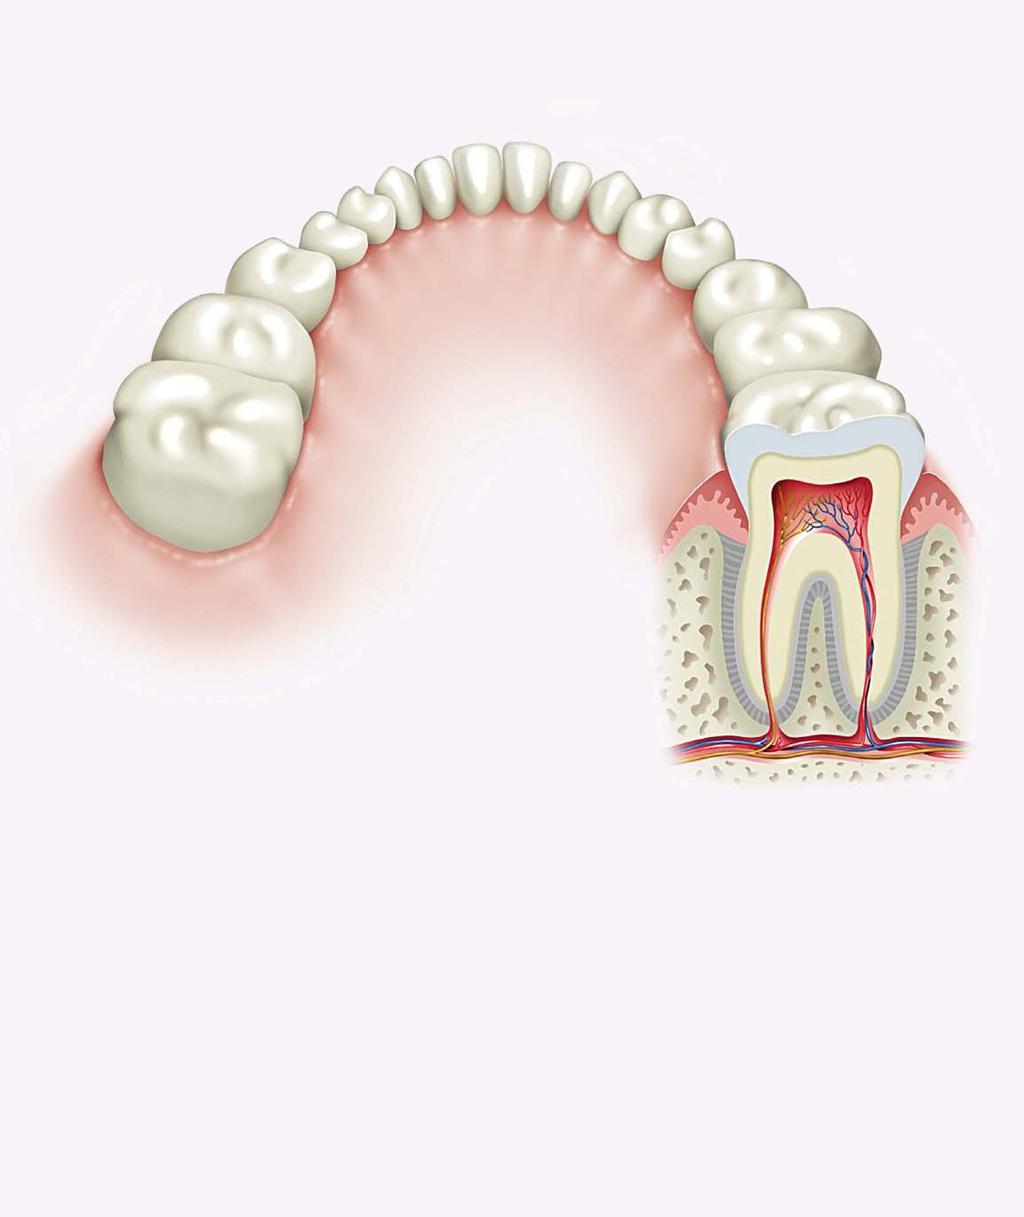 THE STRUCTURE OF YOUR TEETH According to the South African Dental Association (SADA), your teeth consist of the following: Enamel: The hard tissue, which covers the crown of the tooth.